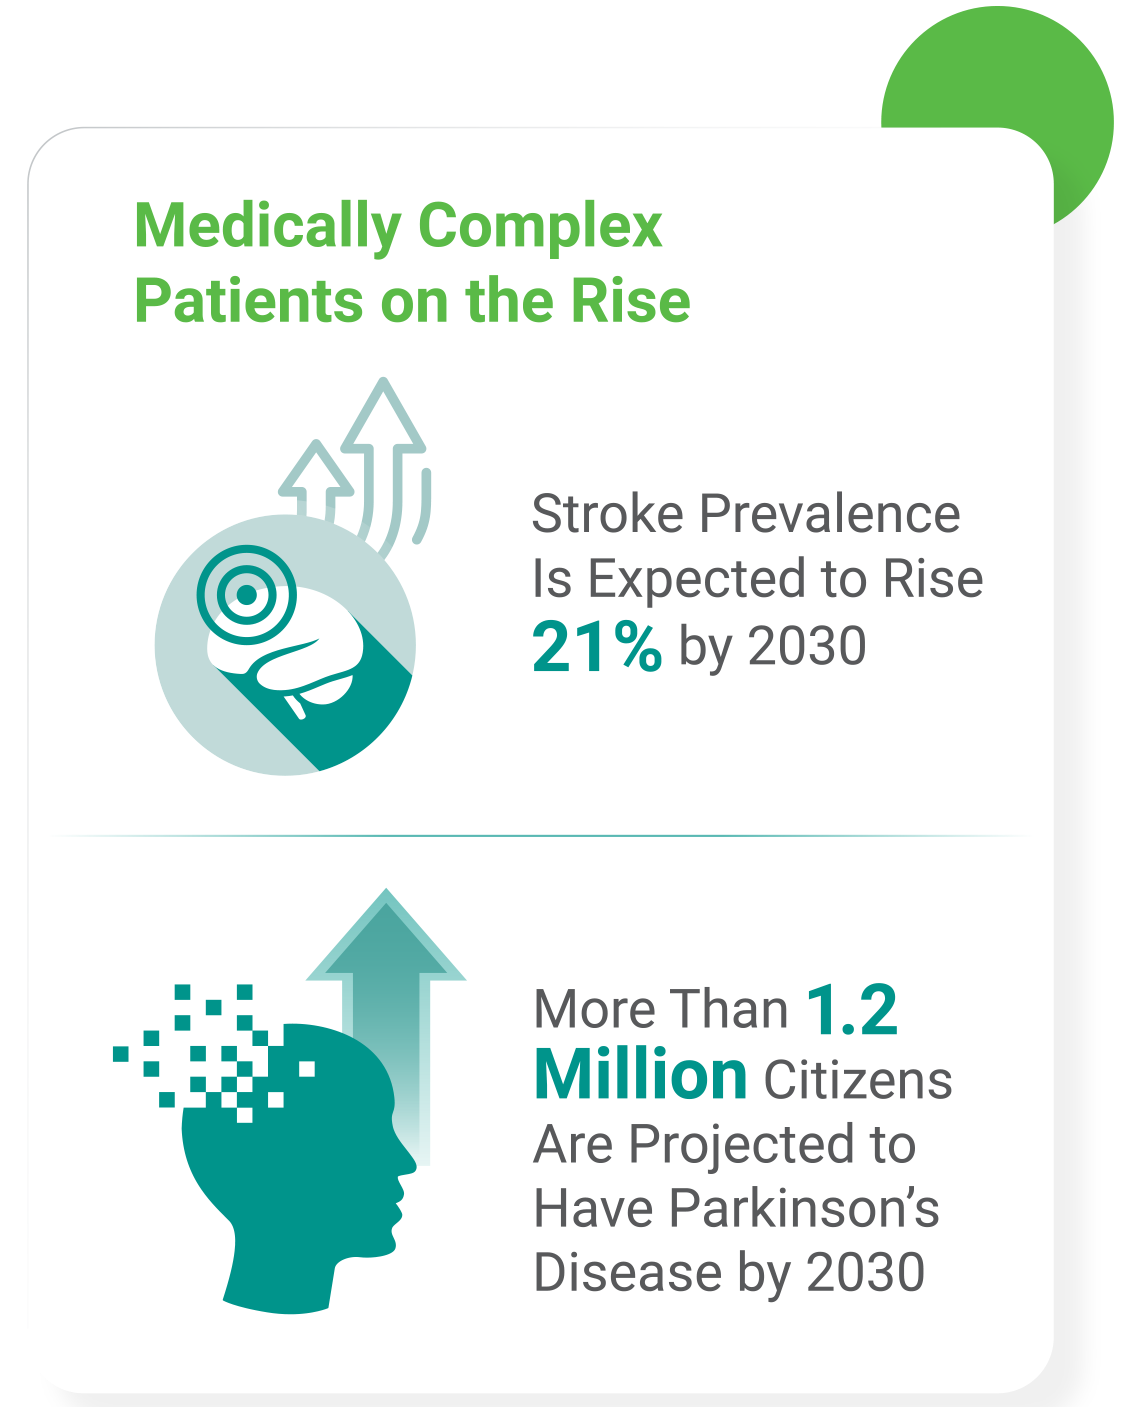 Stroke prevalence is expected to rise 21% by 2030, and more than 1.2 million citizens are projected to have Parkinson’s disease by 2030.